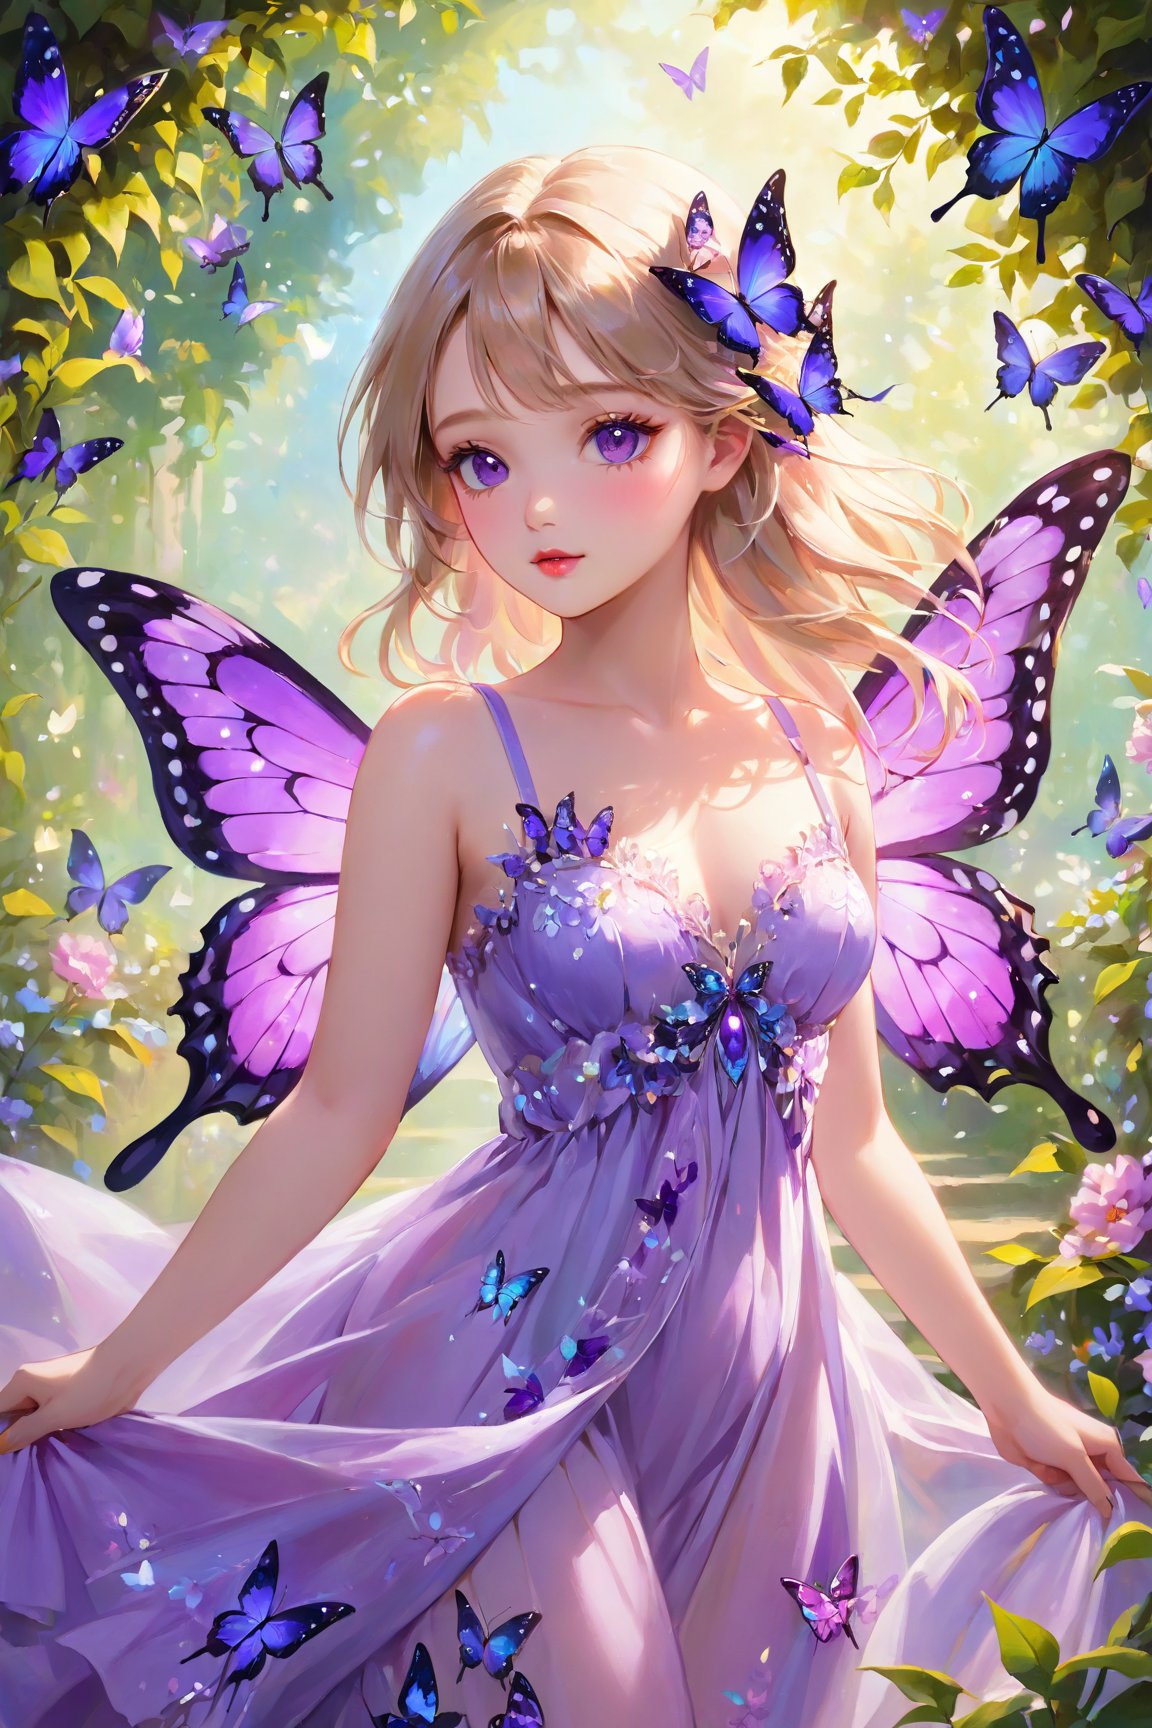 (best quality,4k,8k,highres,masterpiece:1.2),ultra-detailed,Purple butterfly,beautiful detailed eyes,beautiful detailed lips,extremely detailed eyes and face,longeyelashes,artistic oil painting,dreamlike atmosphere,colorful garden background,stunning nature scenery,soft natural lighting,vibrant colors,delicate brushwork,impressive realism,gentle and graceful girl,flowing purple dress,serene expression,ethereal beauty,butterflies floating around the girl,delicate wings with intricate patterns,butterflies symbolizing freedom and transformation,magical and surreal setting,fantasy-inspired artwork,harmonious blend of reality and imagination 